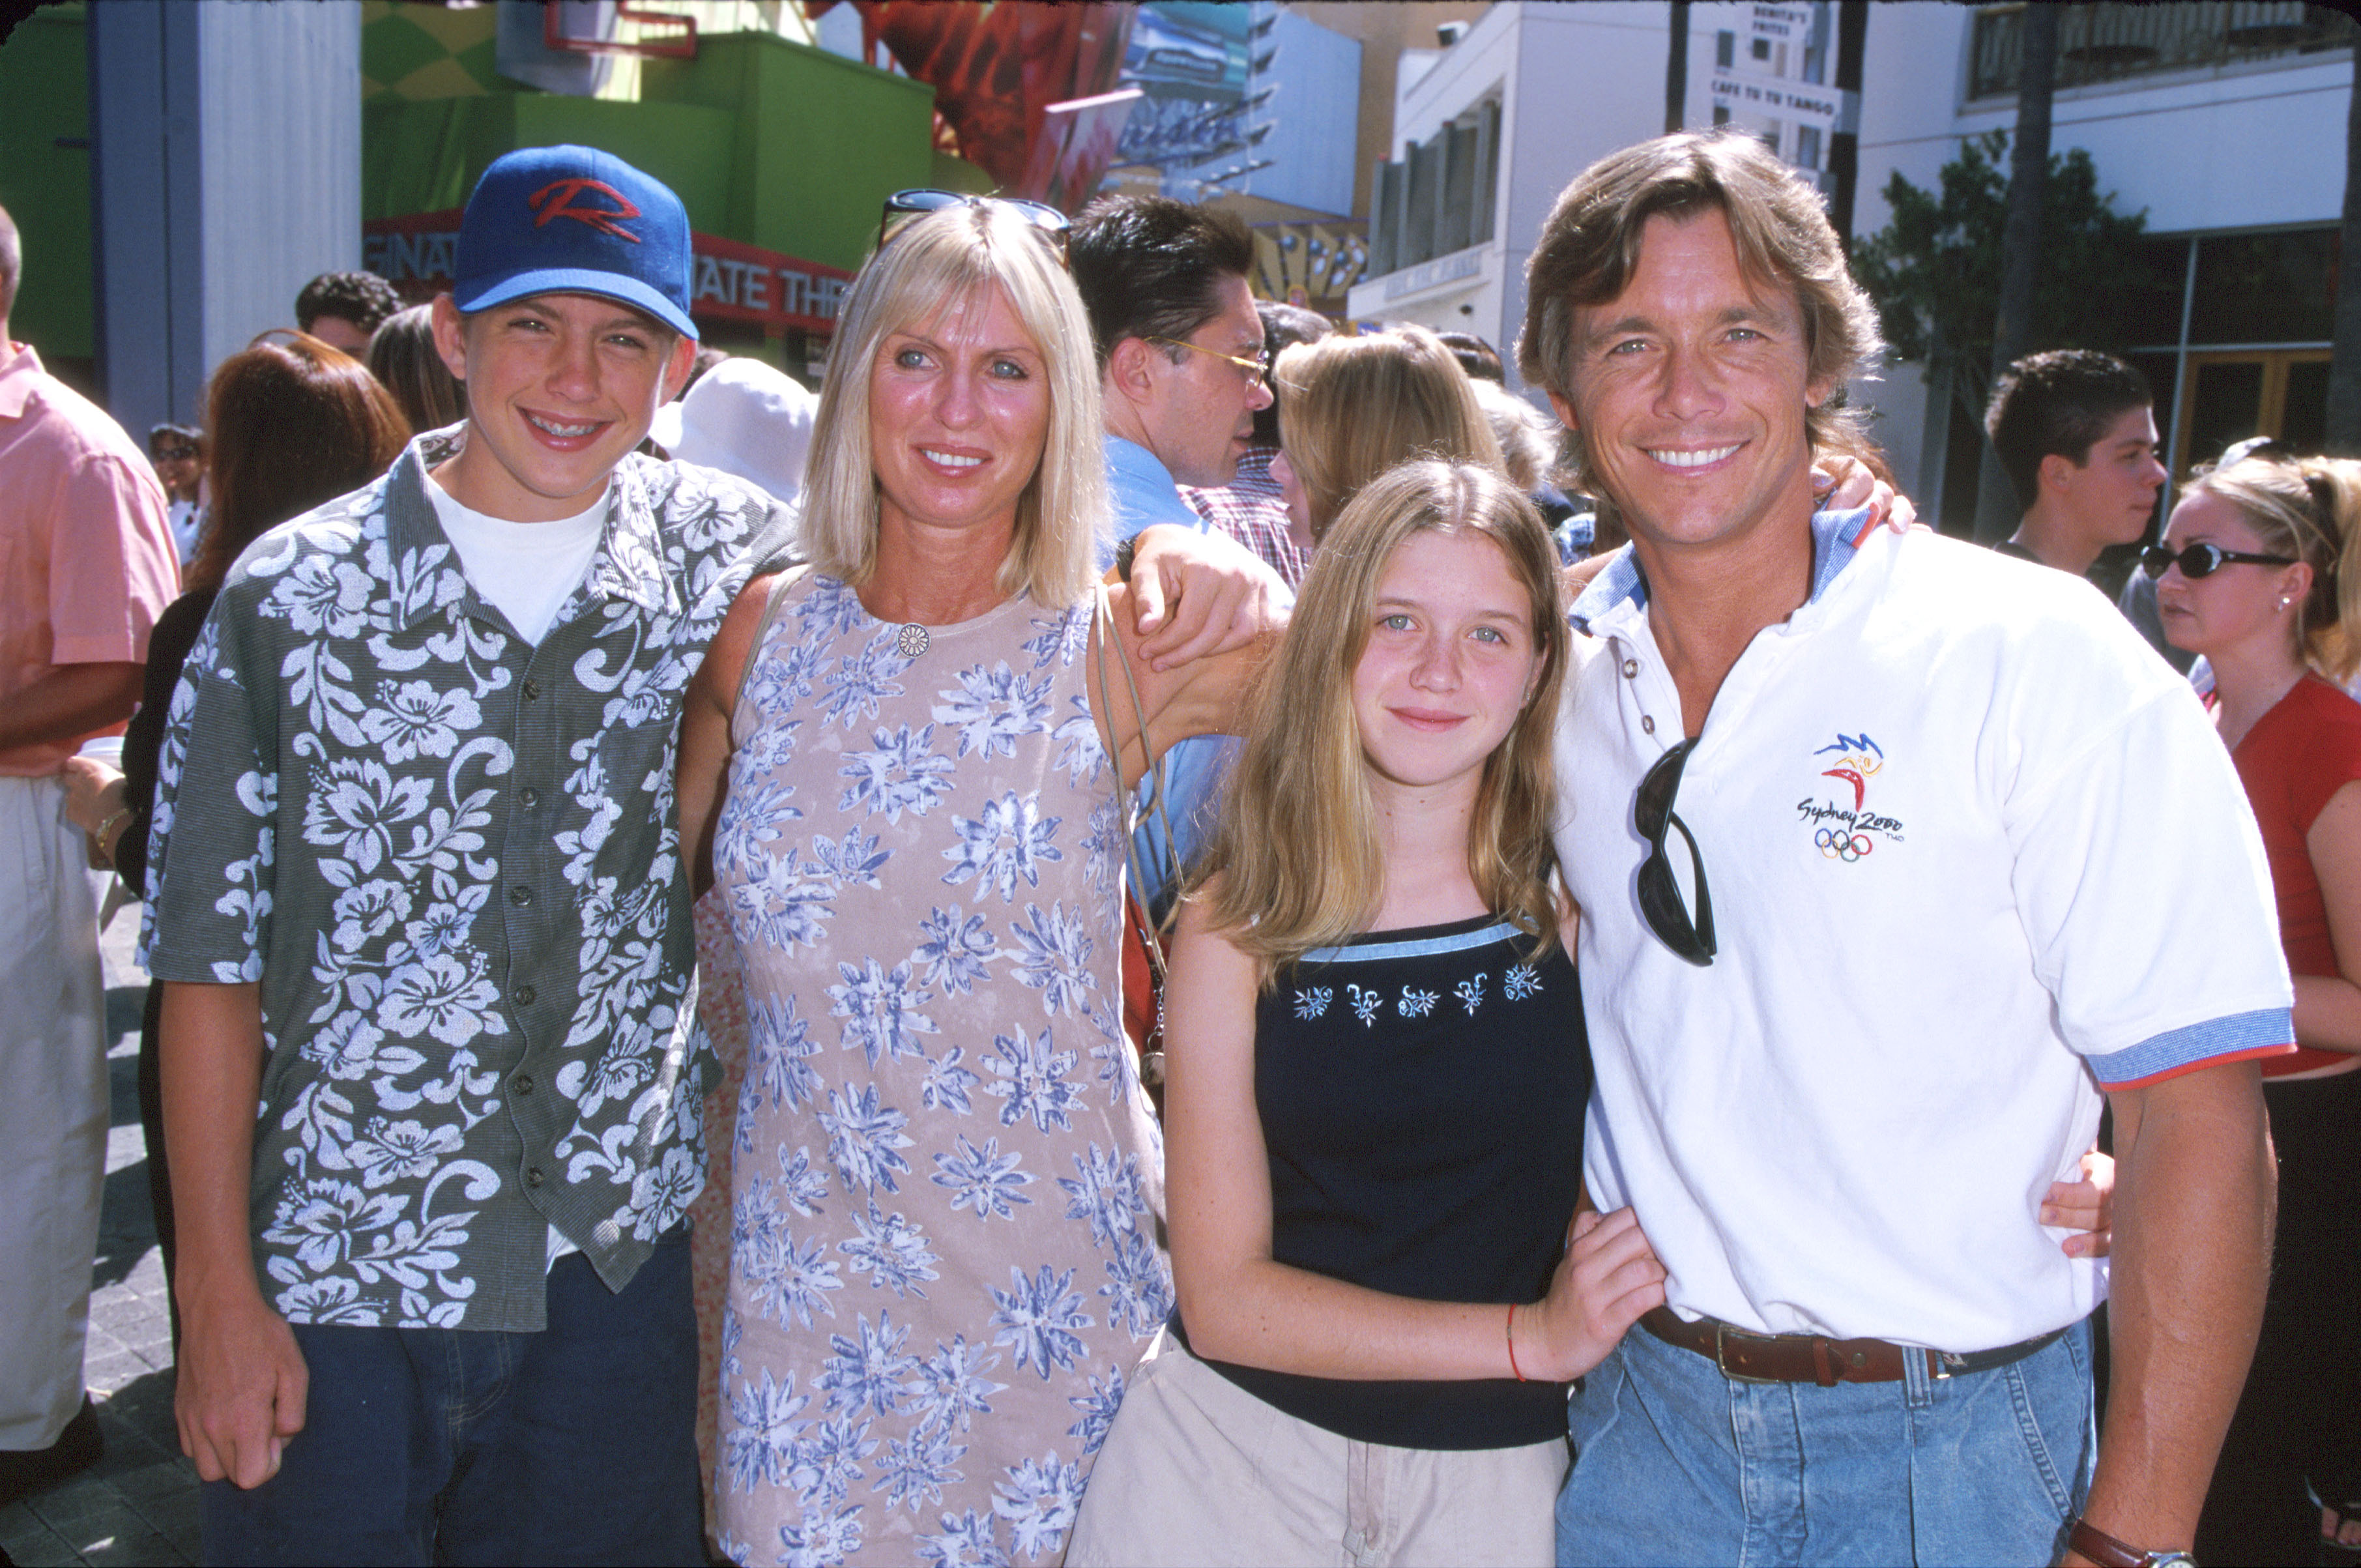 Chris Atkins with his family at the premiere of "The Adventures of Rocky & Bullwinkle" on June 24, 2000, in Universal City, California. | Source: Getty Images